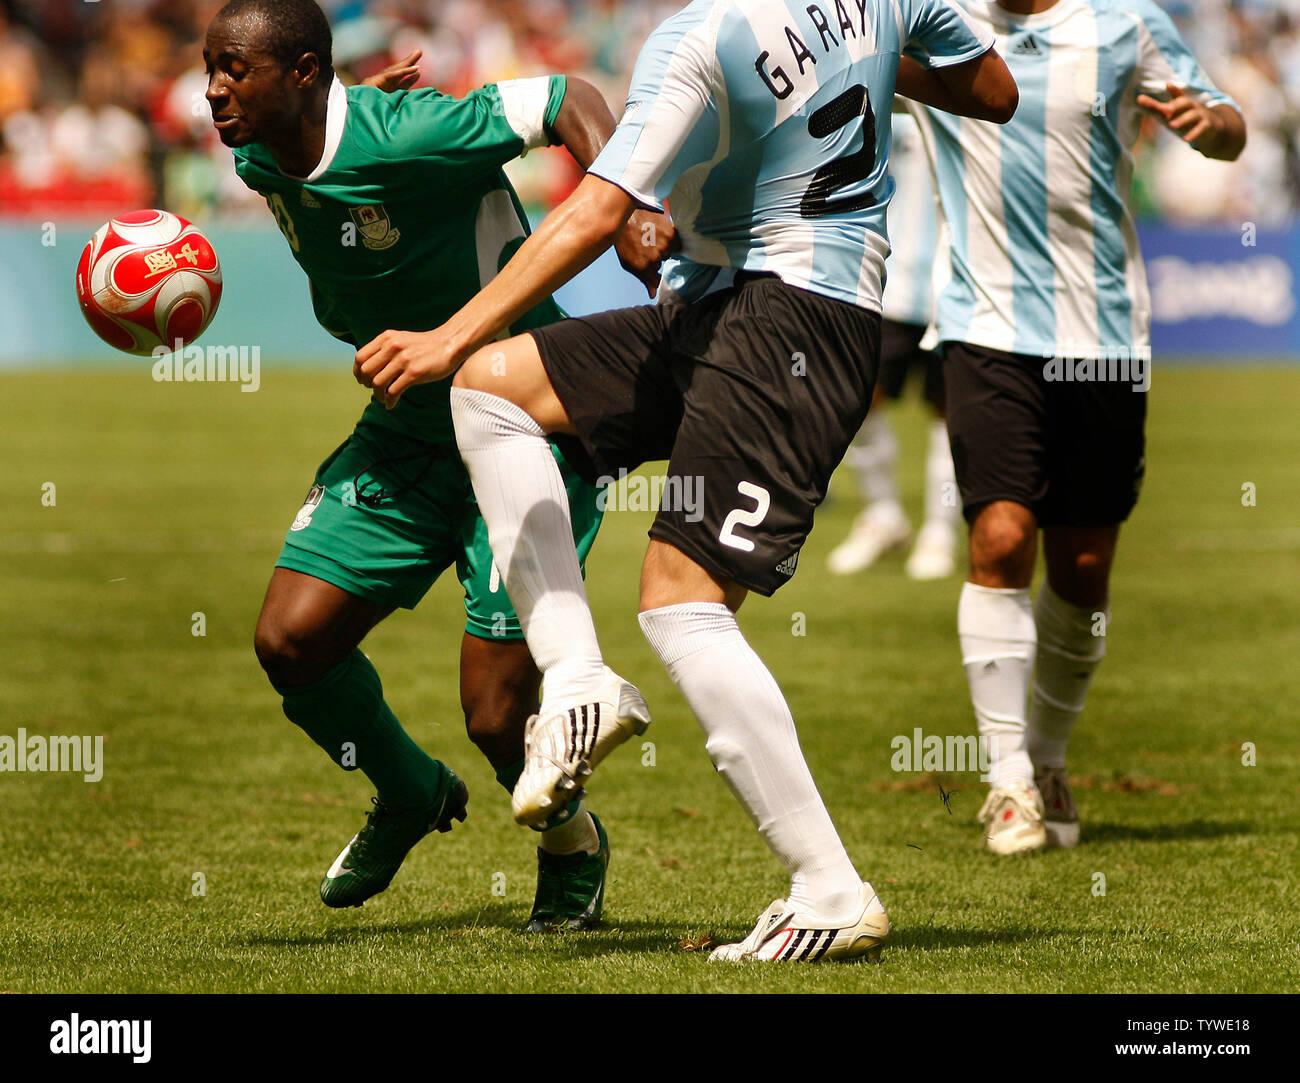 Argentina's Ezequiel Garay (R) and Nigeria's Promise Isaac fight for the ball during the men's football final in the Beijing 2008 Olympic Games August 23, 2008.  Argentina won 1-0 for the gold, while Nigeria settled for the silver and Brazil the bronze.  (UPI Photo/Stephen Shaver) Stock Photo